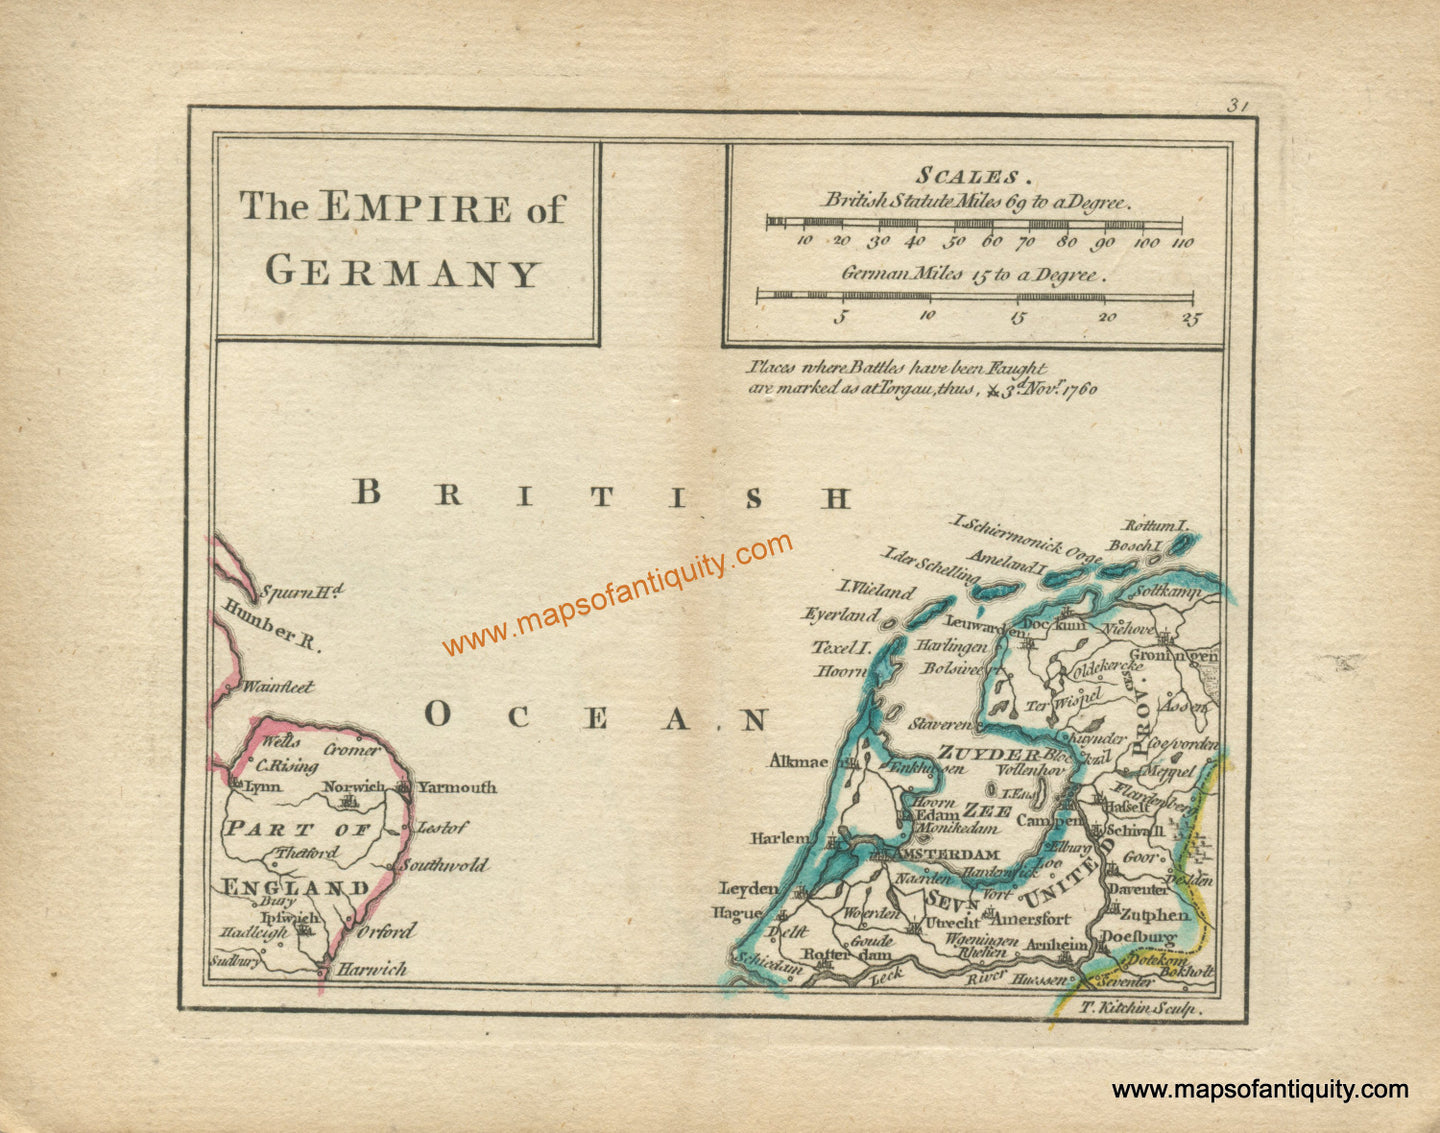 Antique-Hand-Colored-Map-The-Empire-of-Germany-part-1-feat.-Netherlands-Europe-Germany-1761-Dury-Maps-Of-Antiquity